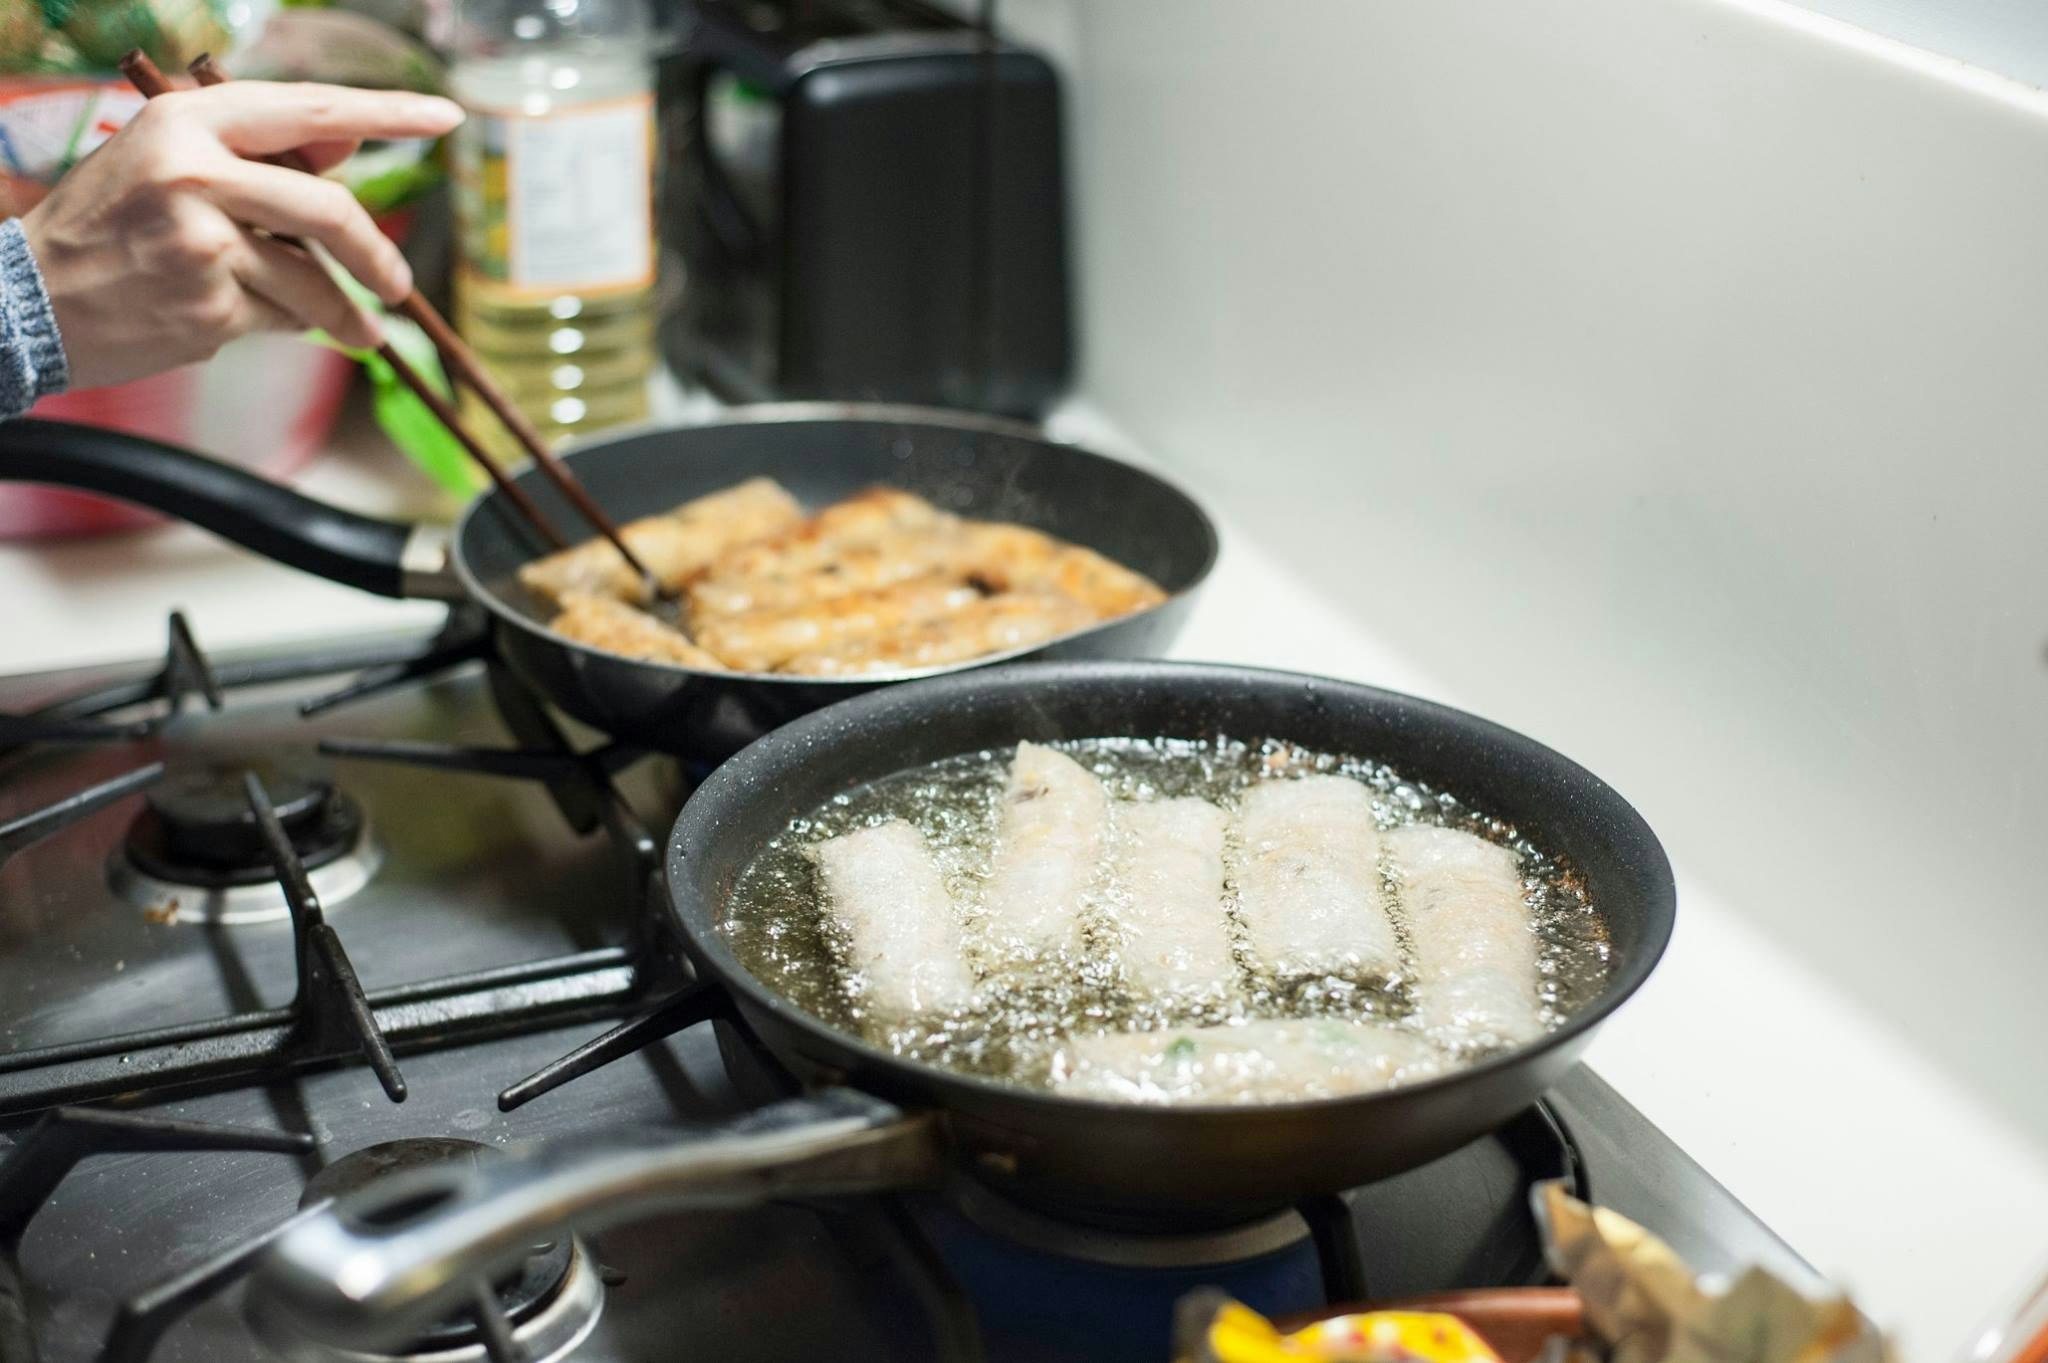 Two frying pans filled with oil and chả giò (Vietnamese spring rolls). A hand holding chopsticks turns one of the spring rolls over in the pan.